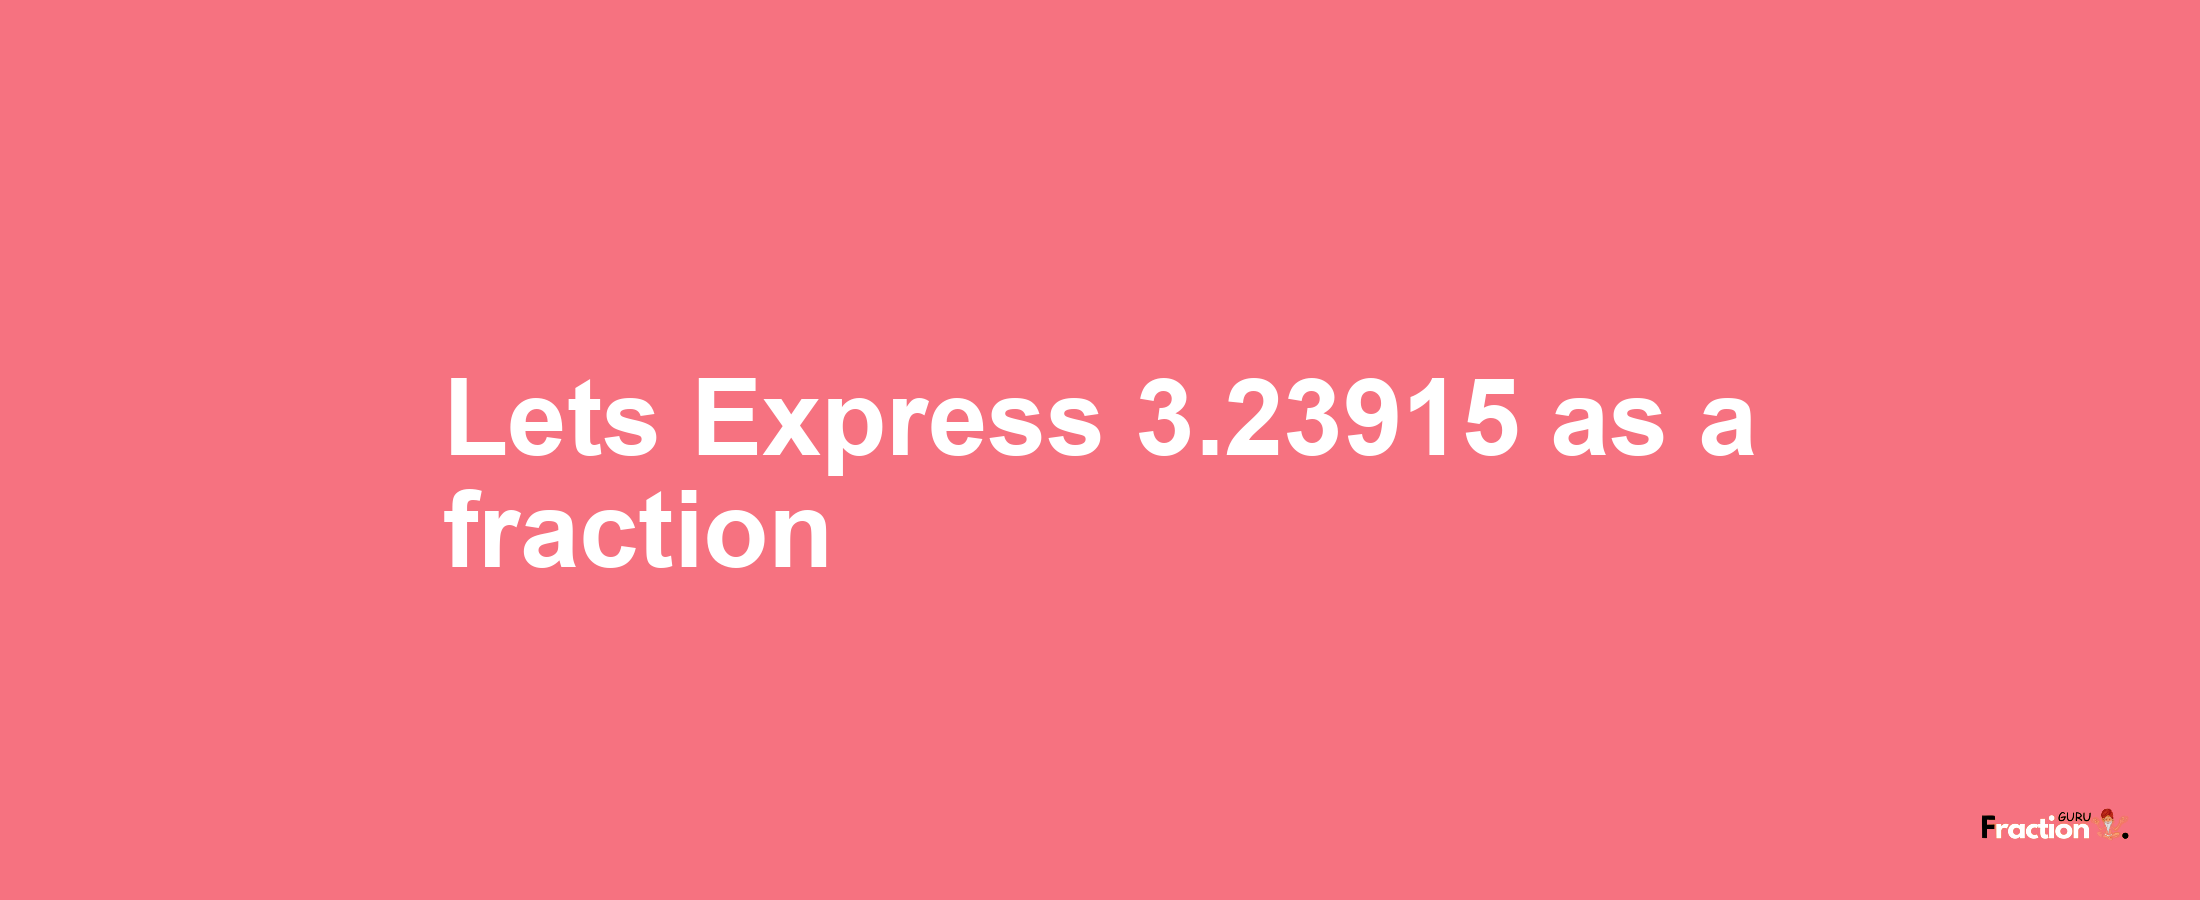 Lets Express 3.23915 as afraction